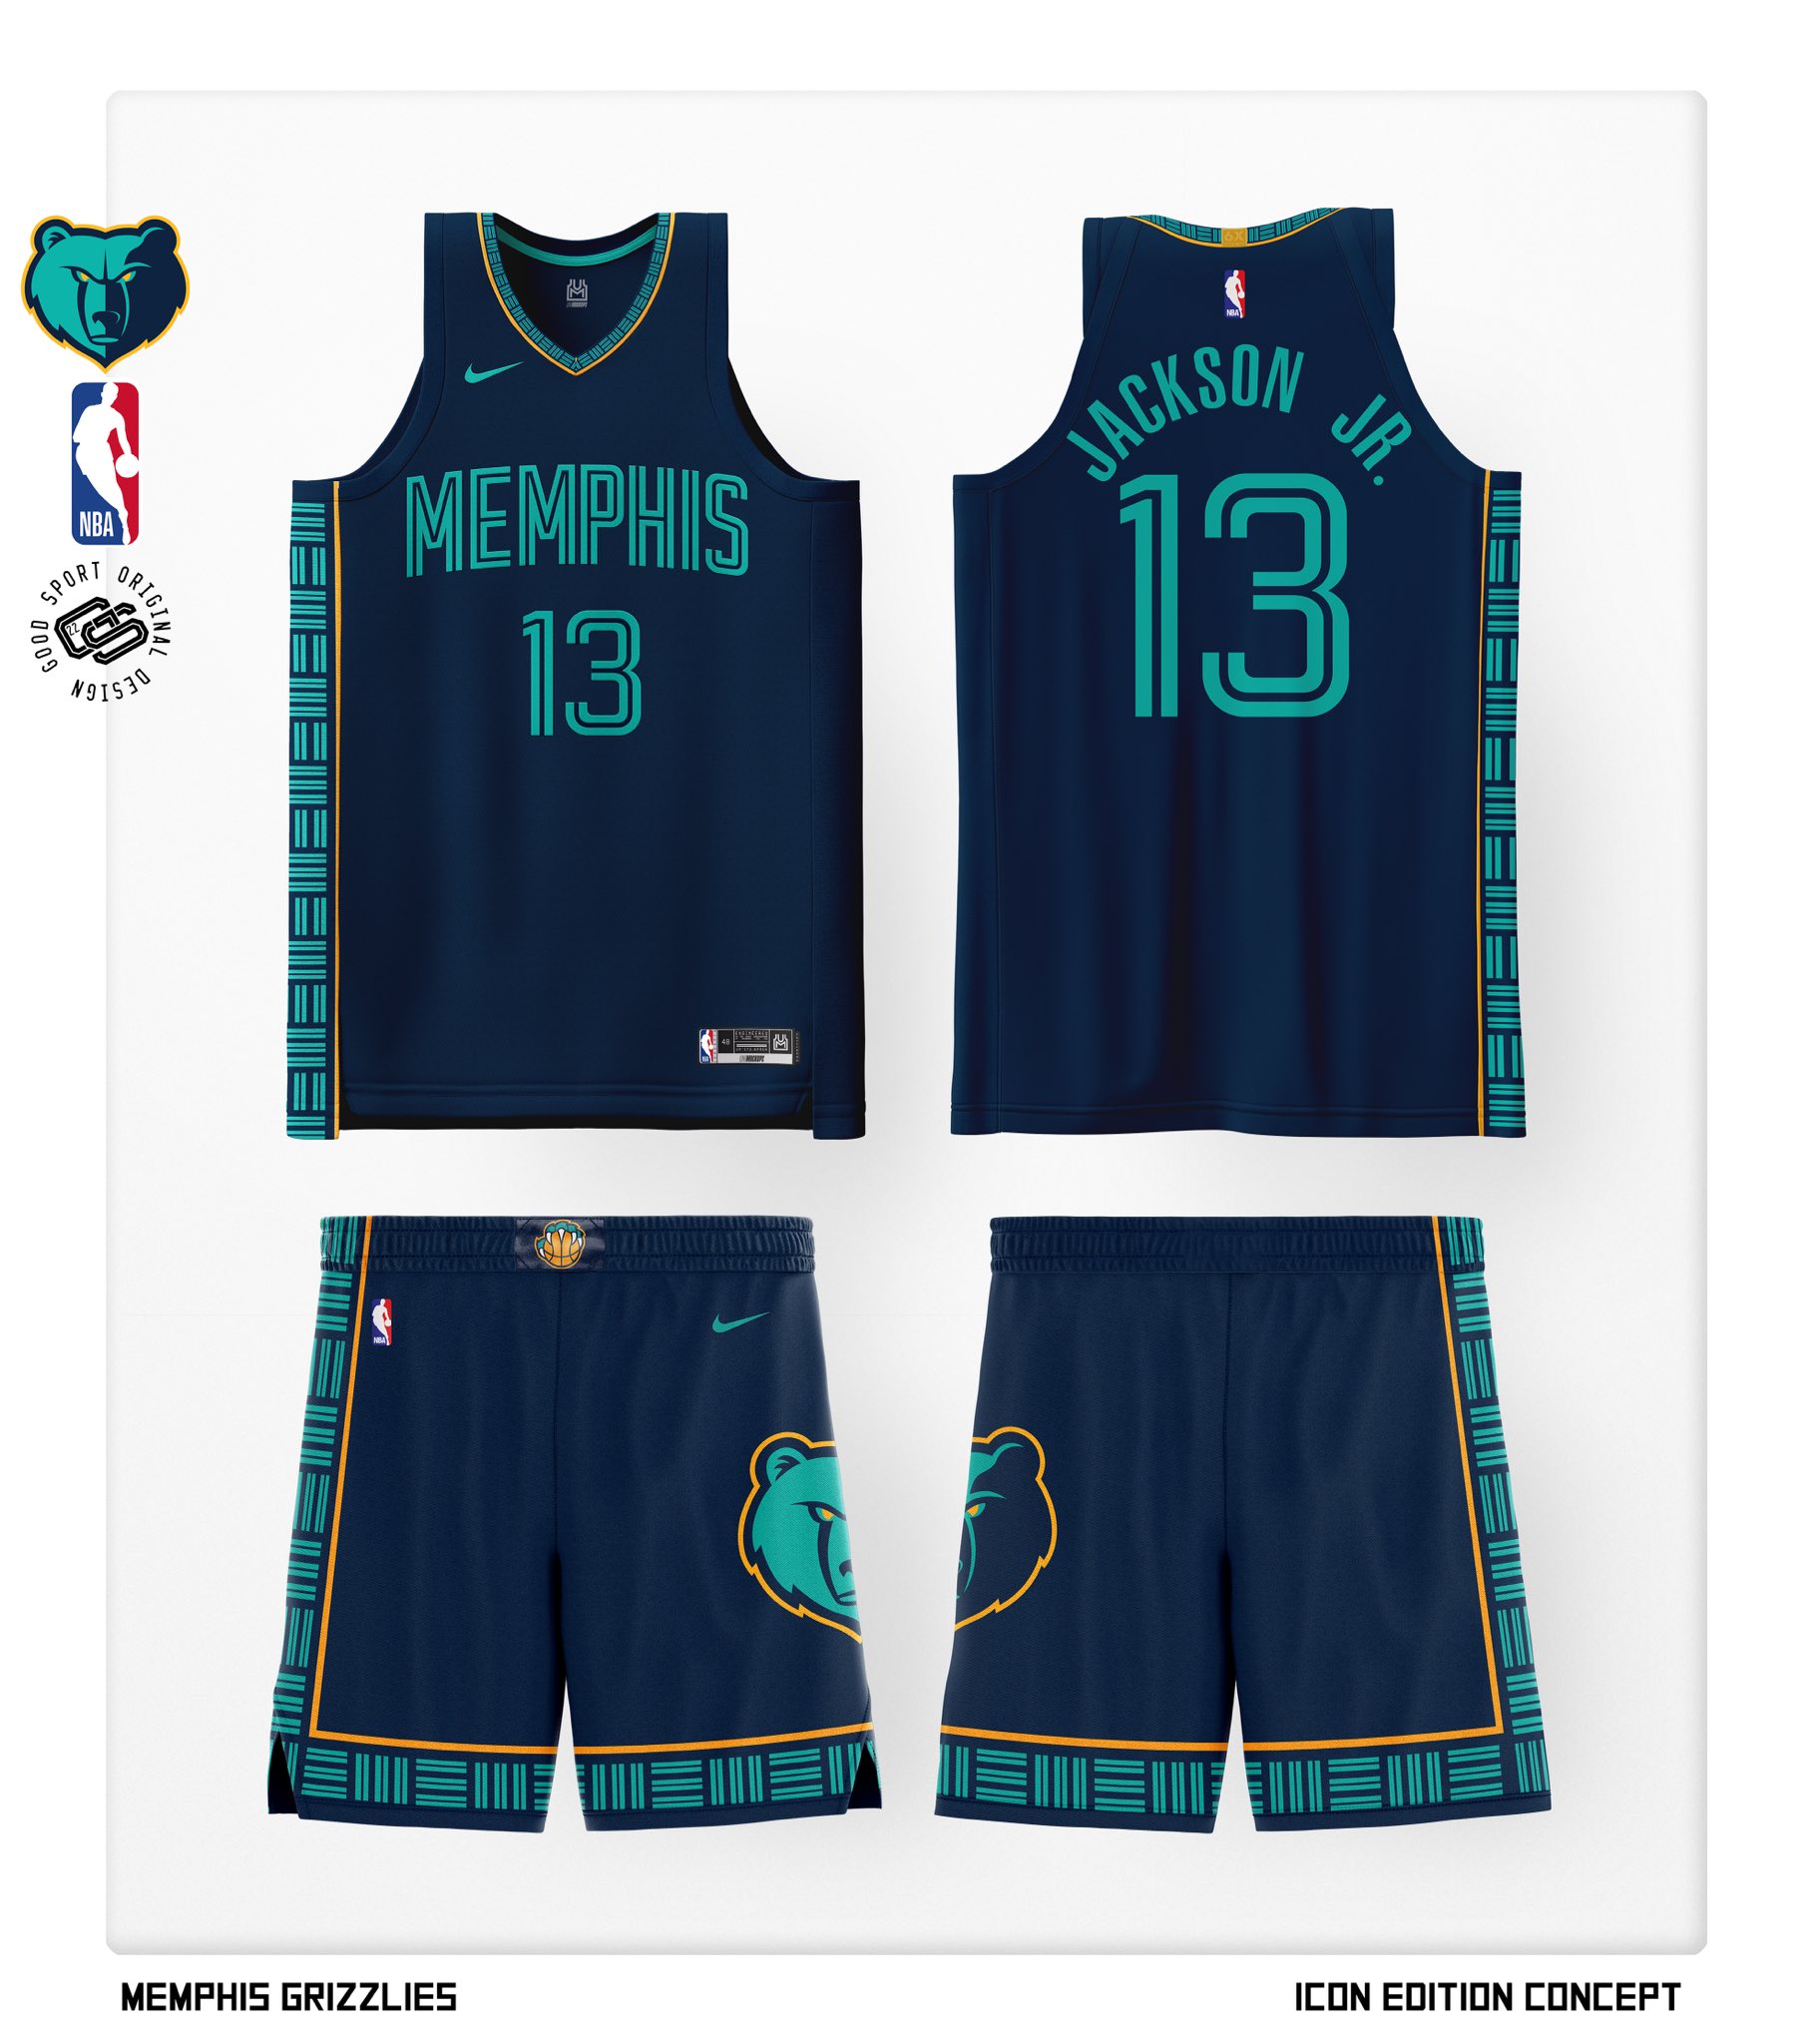 GritGrindGrizz: Grizz go against the grain with new uniforms